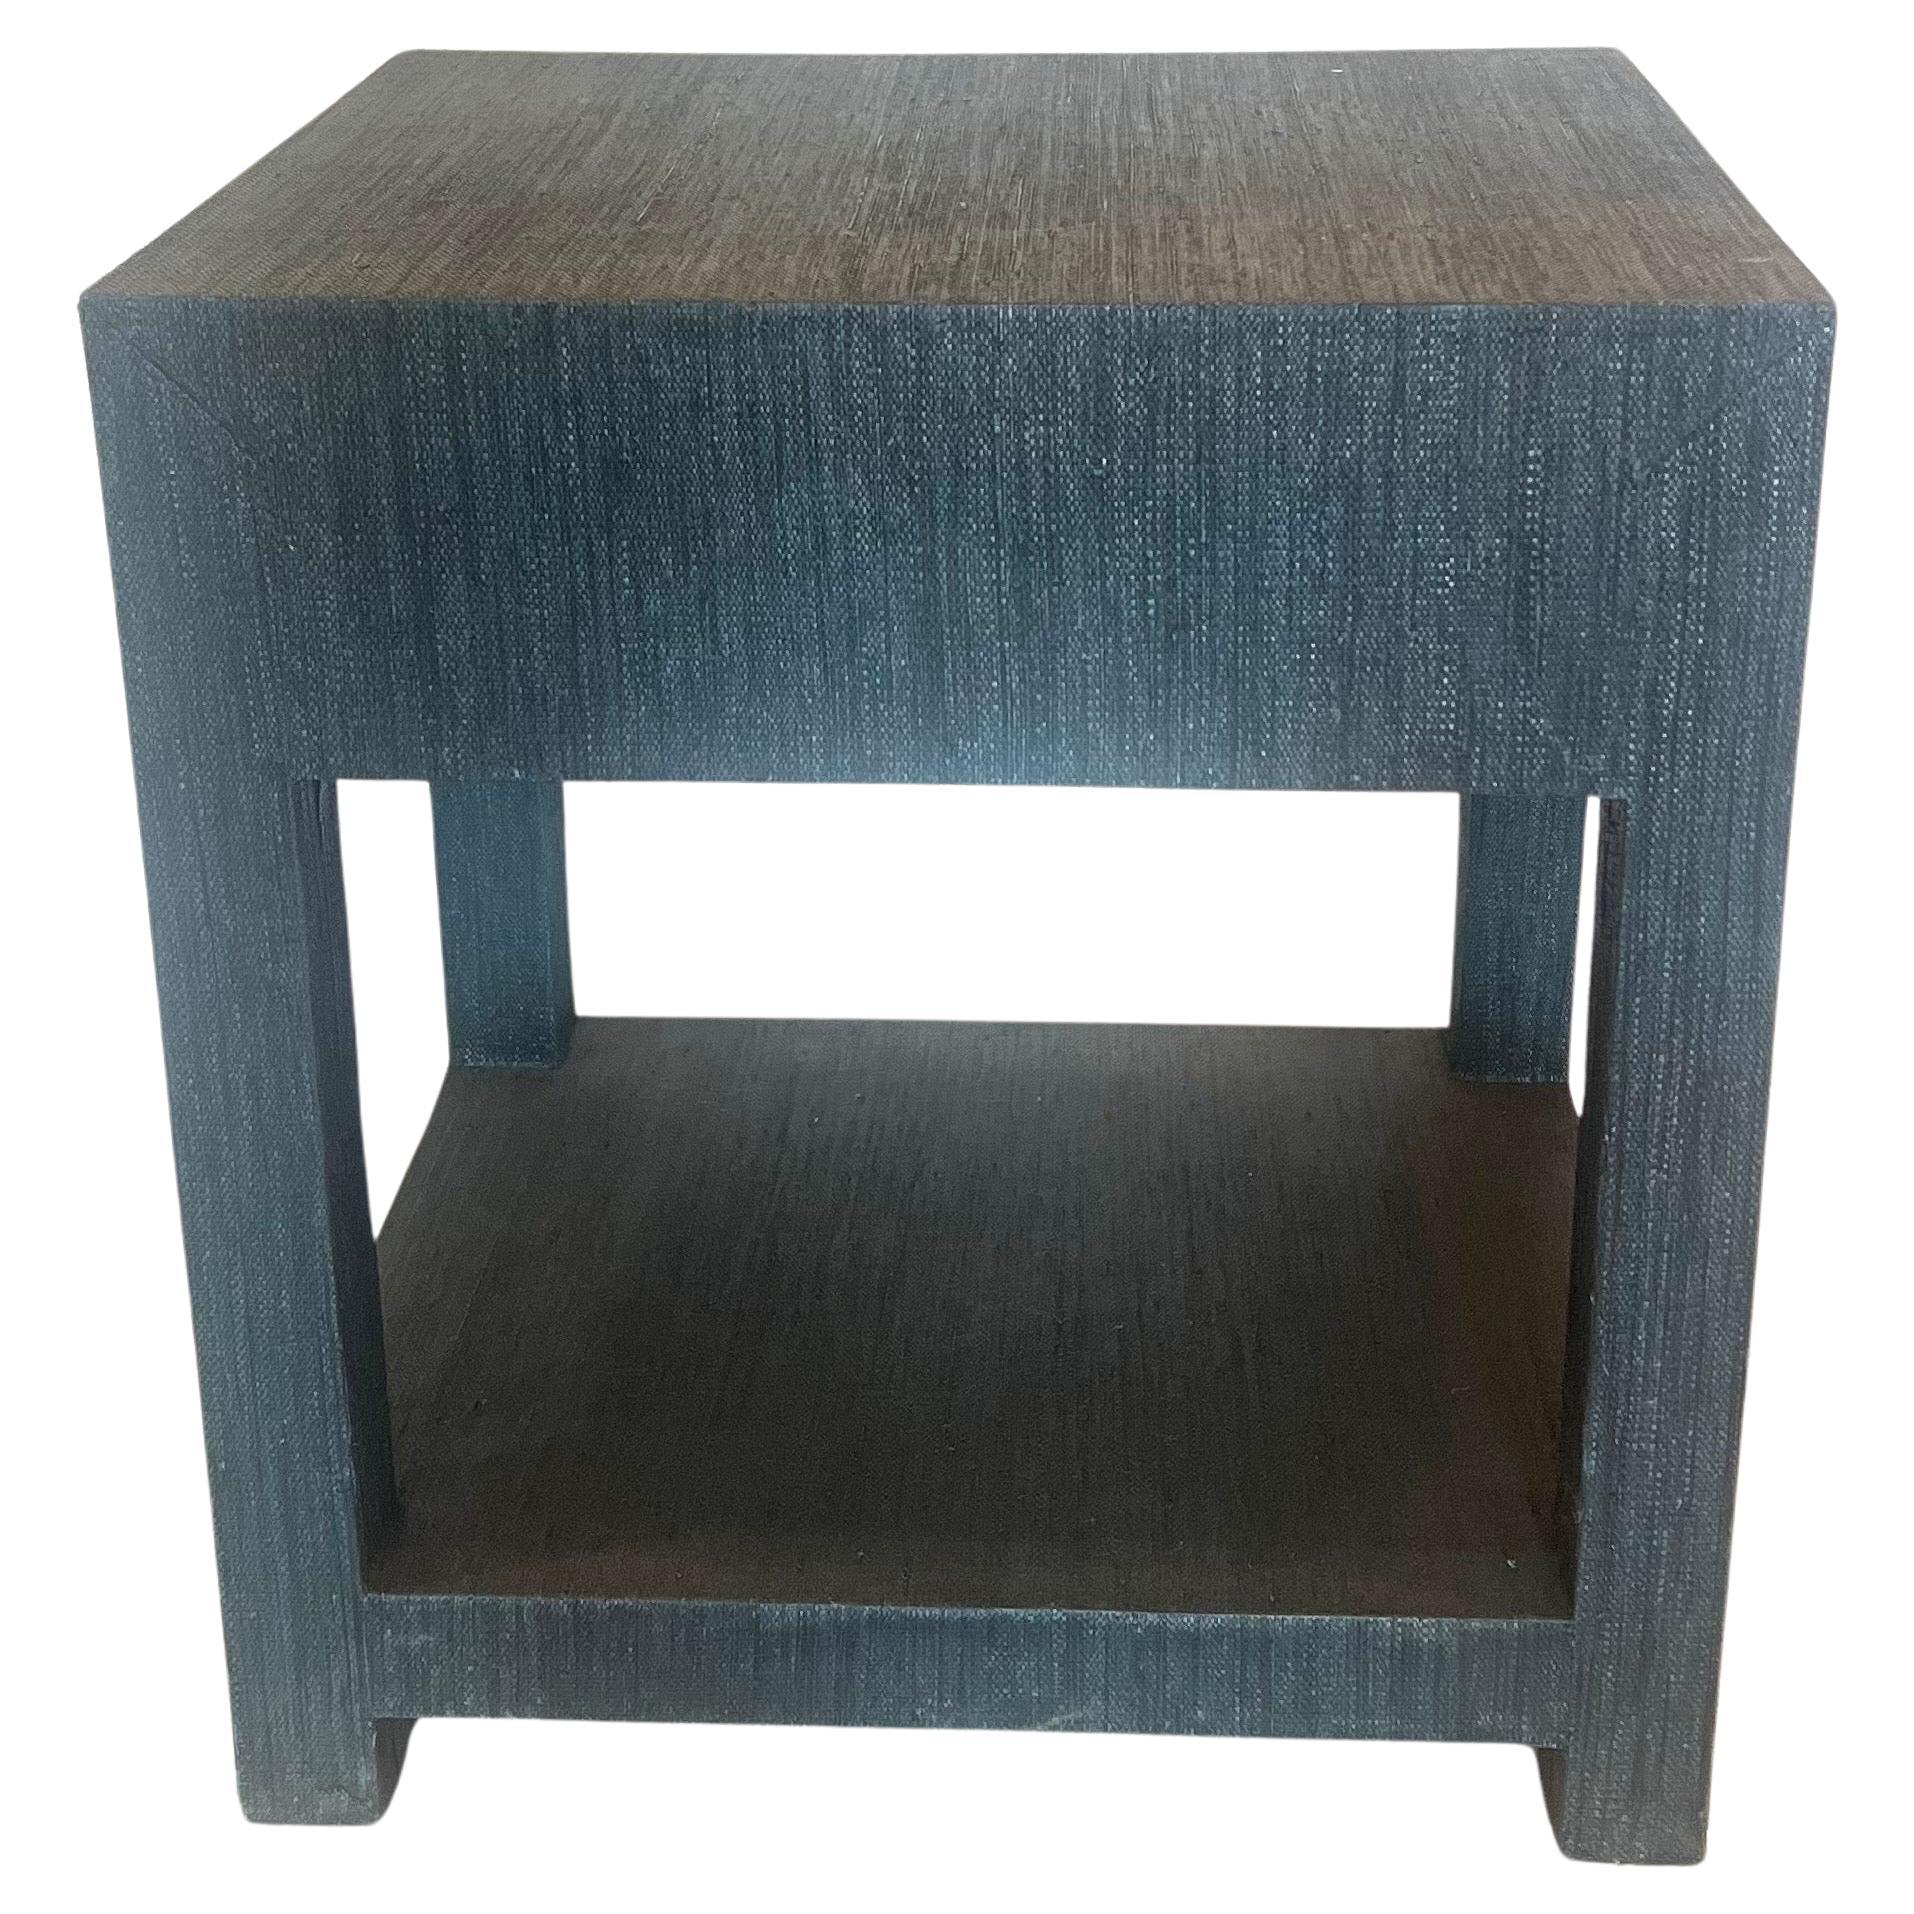 Hand wrapped in painted navy blue linen. A matte lacquer finish. A single drawer, a glint of brass. beautiful elegant nightstand excellent quality nice condition,  linen. A matte lacquer finish. A single drawer, a glint of brass.

Frame is solid